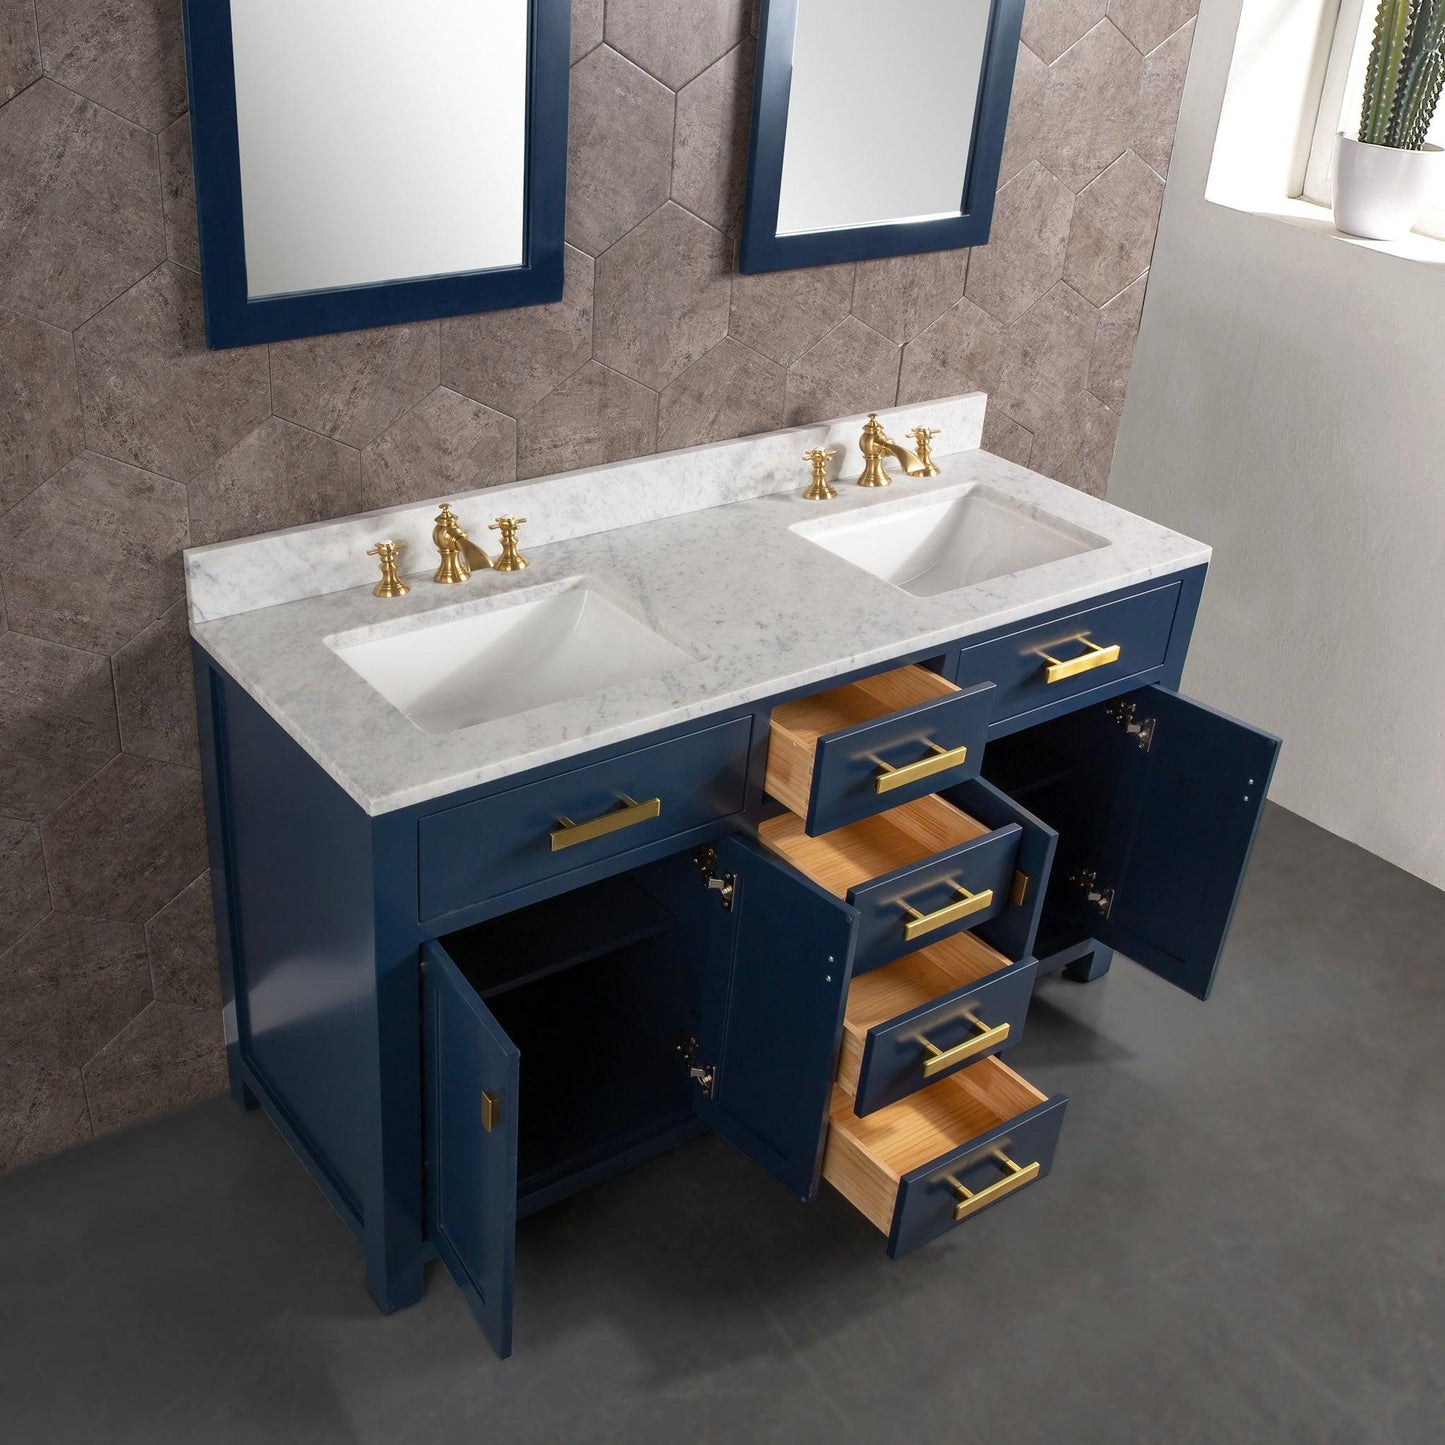 Water Creation Madison 60" Double Sink Carrara White Marble Vanity In Monarch BlueWith Matching Mirror(s)